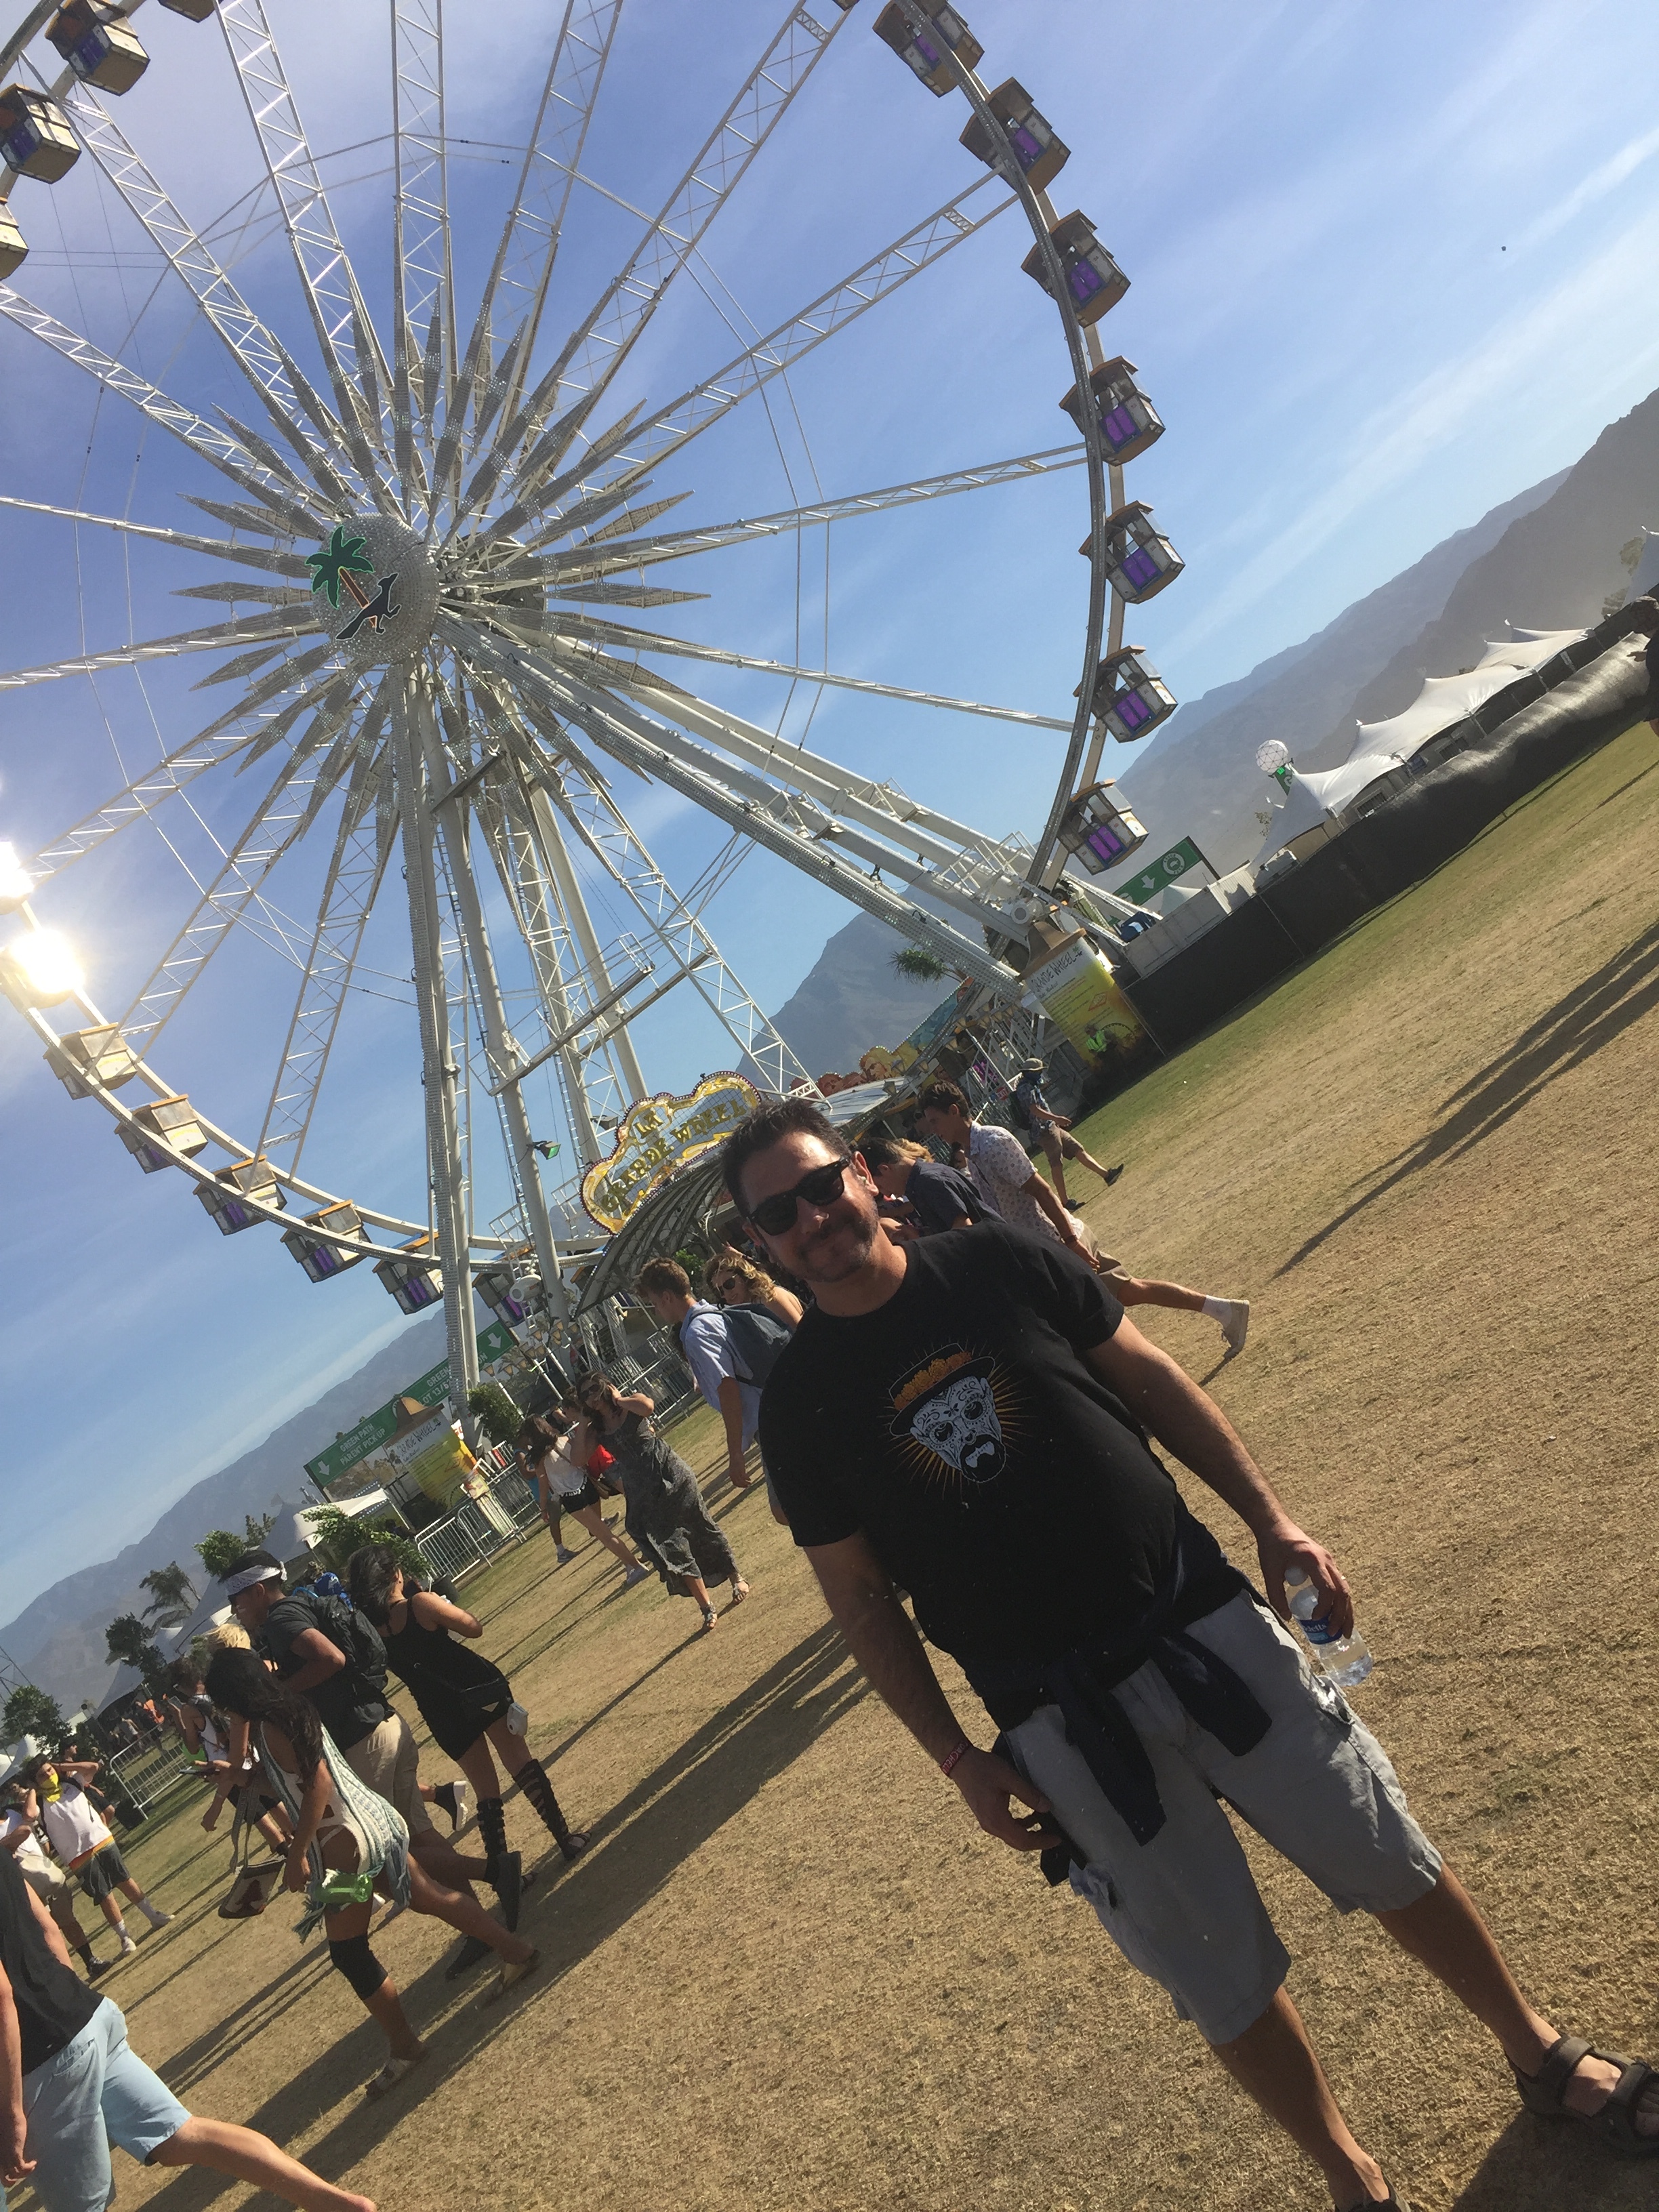  VisionBroadcast Blog (yours truly) @Coachella 2016! 